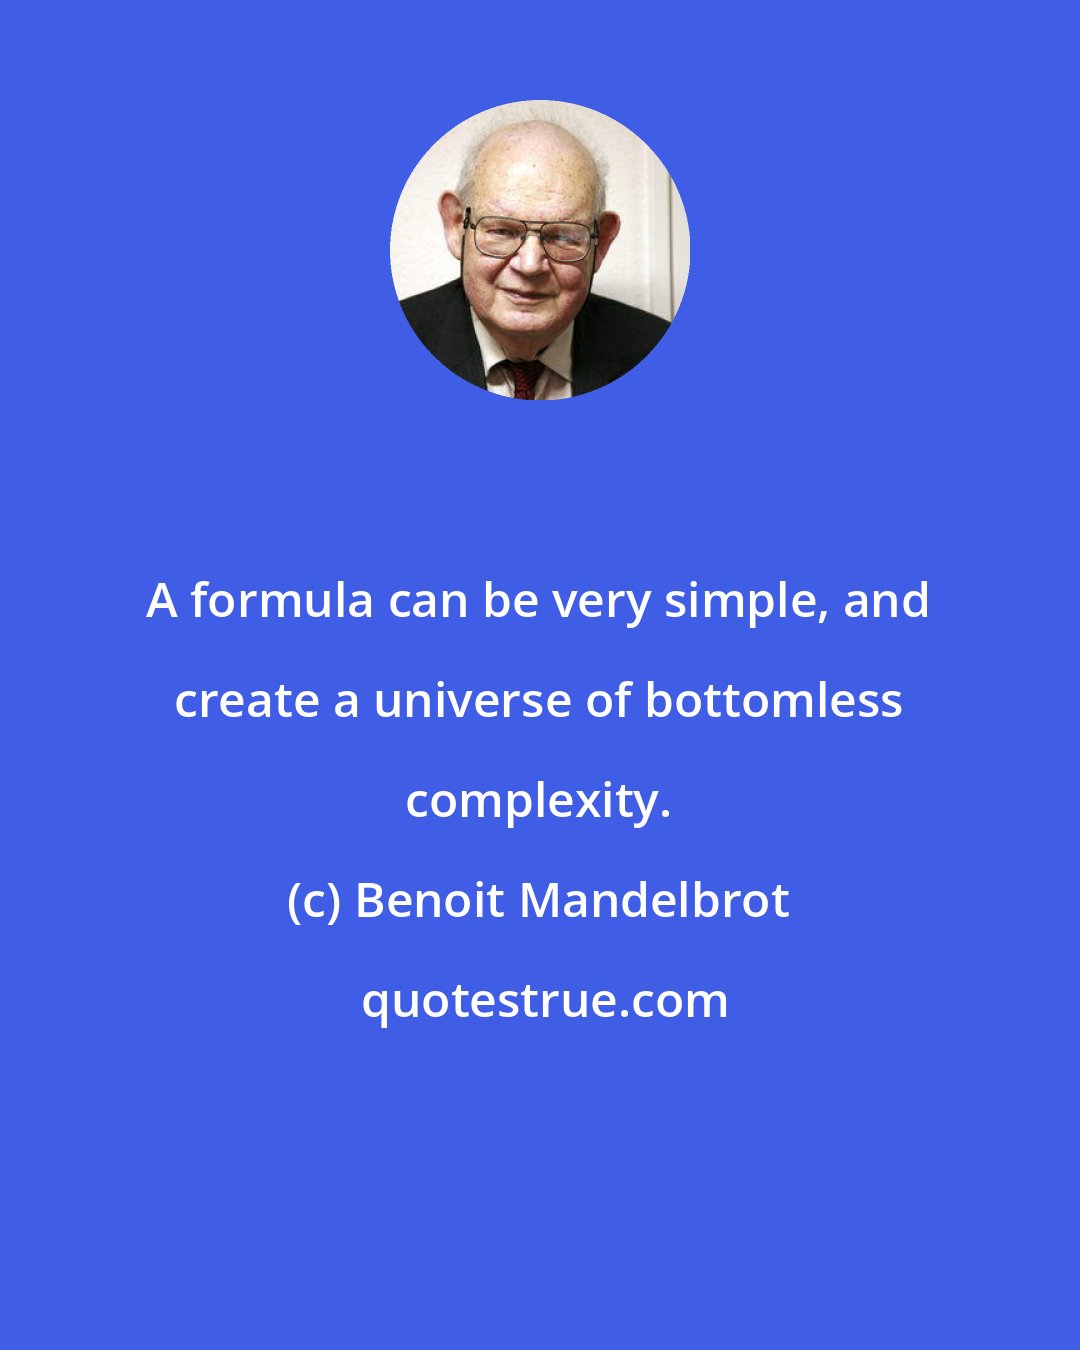 Benoit Mandelbrot: A formula can be very simple, and create a universe of bottomless complexity.